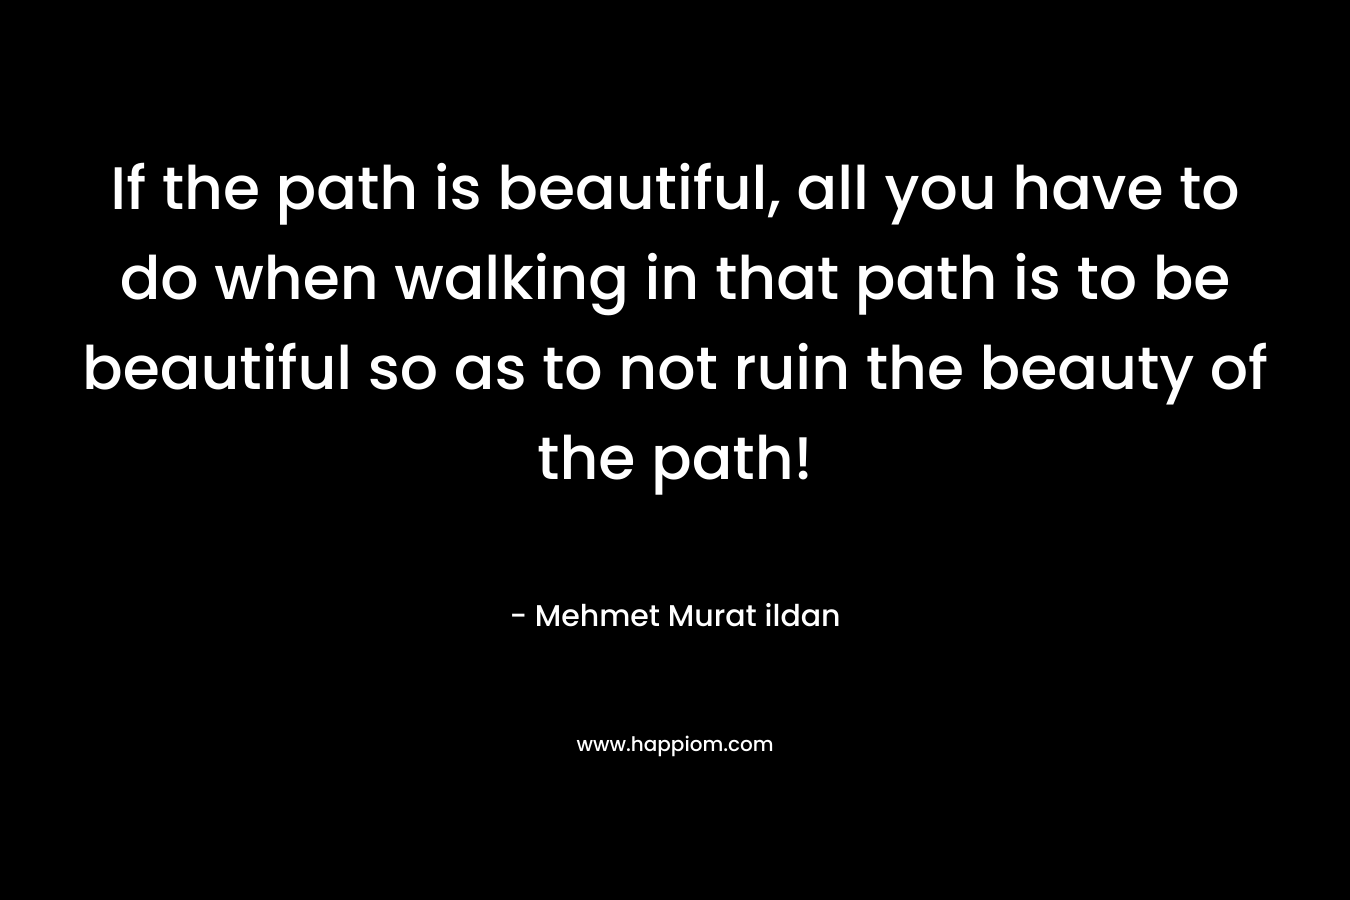 If the path is beautiful, all you have to do when walking in that path is to be beautiful so as to not ruin the beauty of the path!